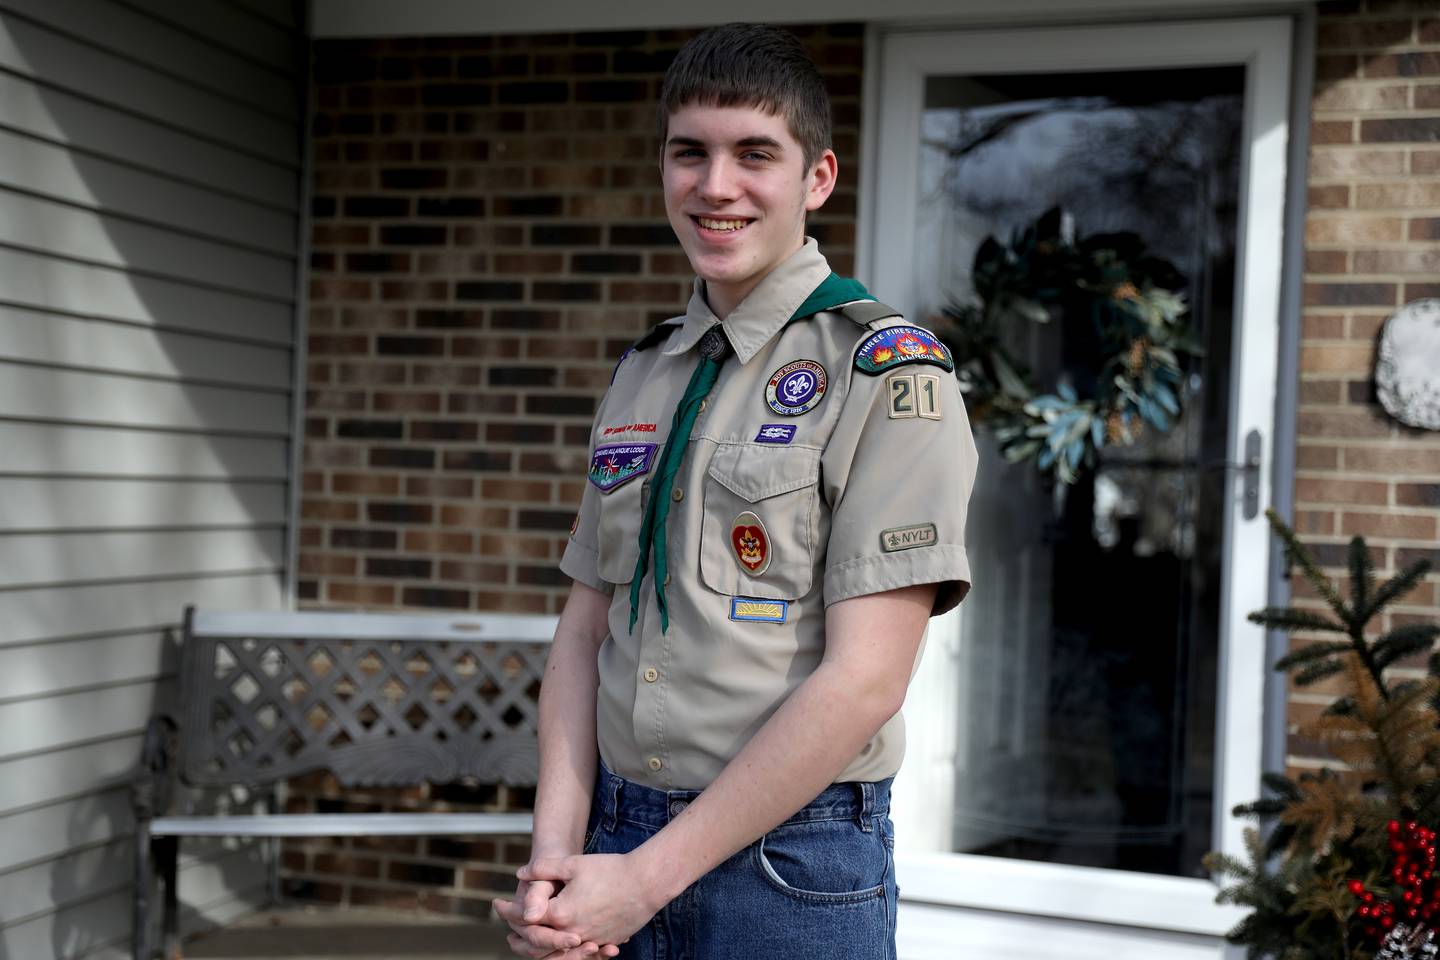 Batavia Boy Scout Troop 21 Life Scout Ethan Tarver will host a free public viewing of a documentary about suicide with a panel of local mental health professionals participating in a Q&A session afterward to complete his Eagle Scout badge requirements. The showing of the documentary, “The S Word,” is at 7 p.m. March 24 at the Batavia Civic Center.